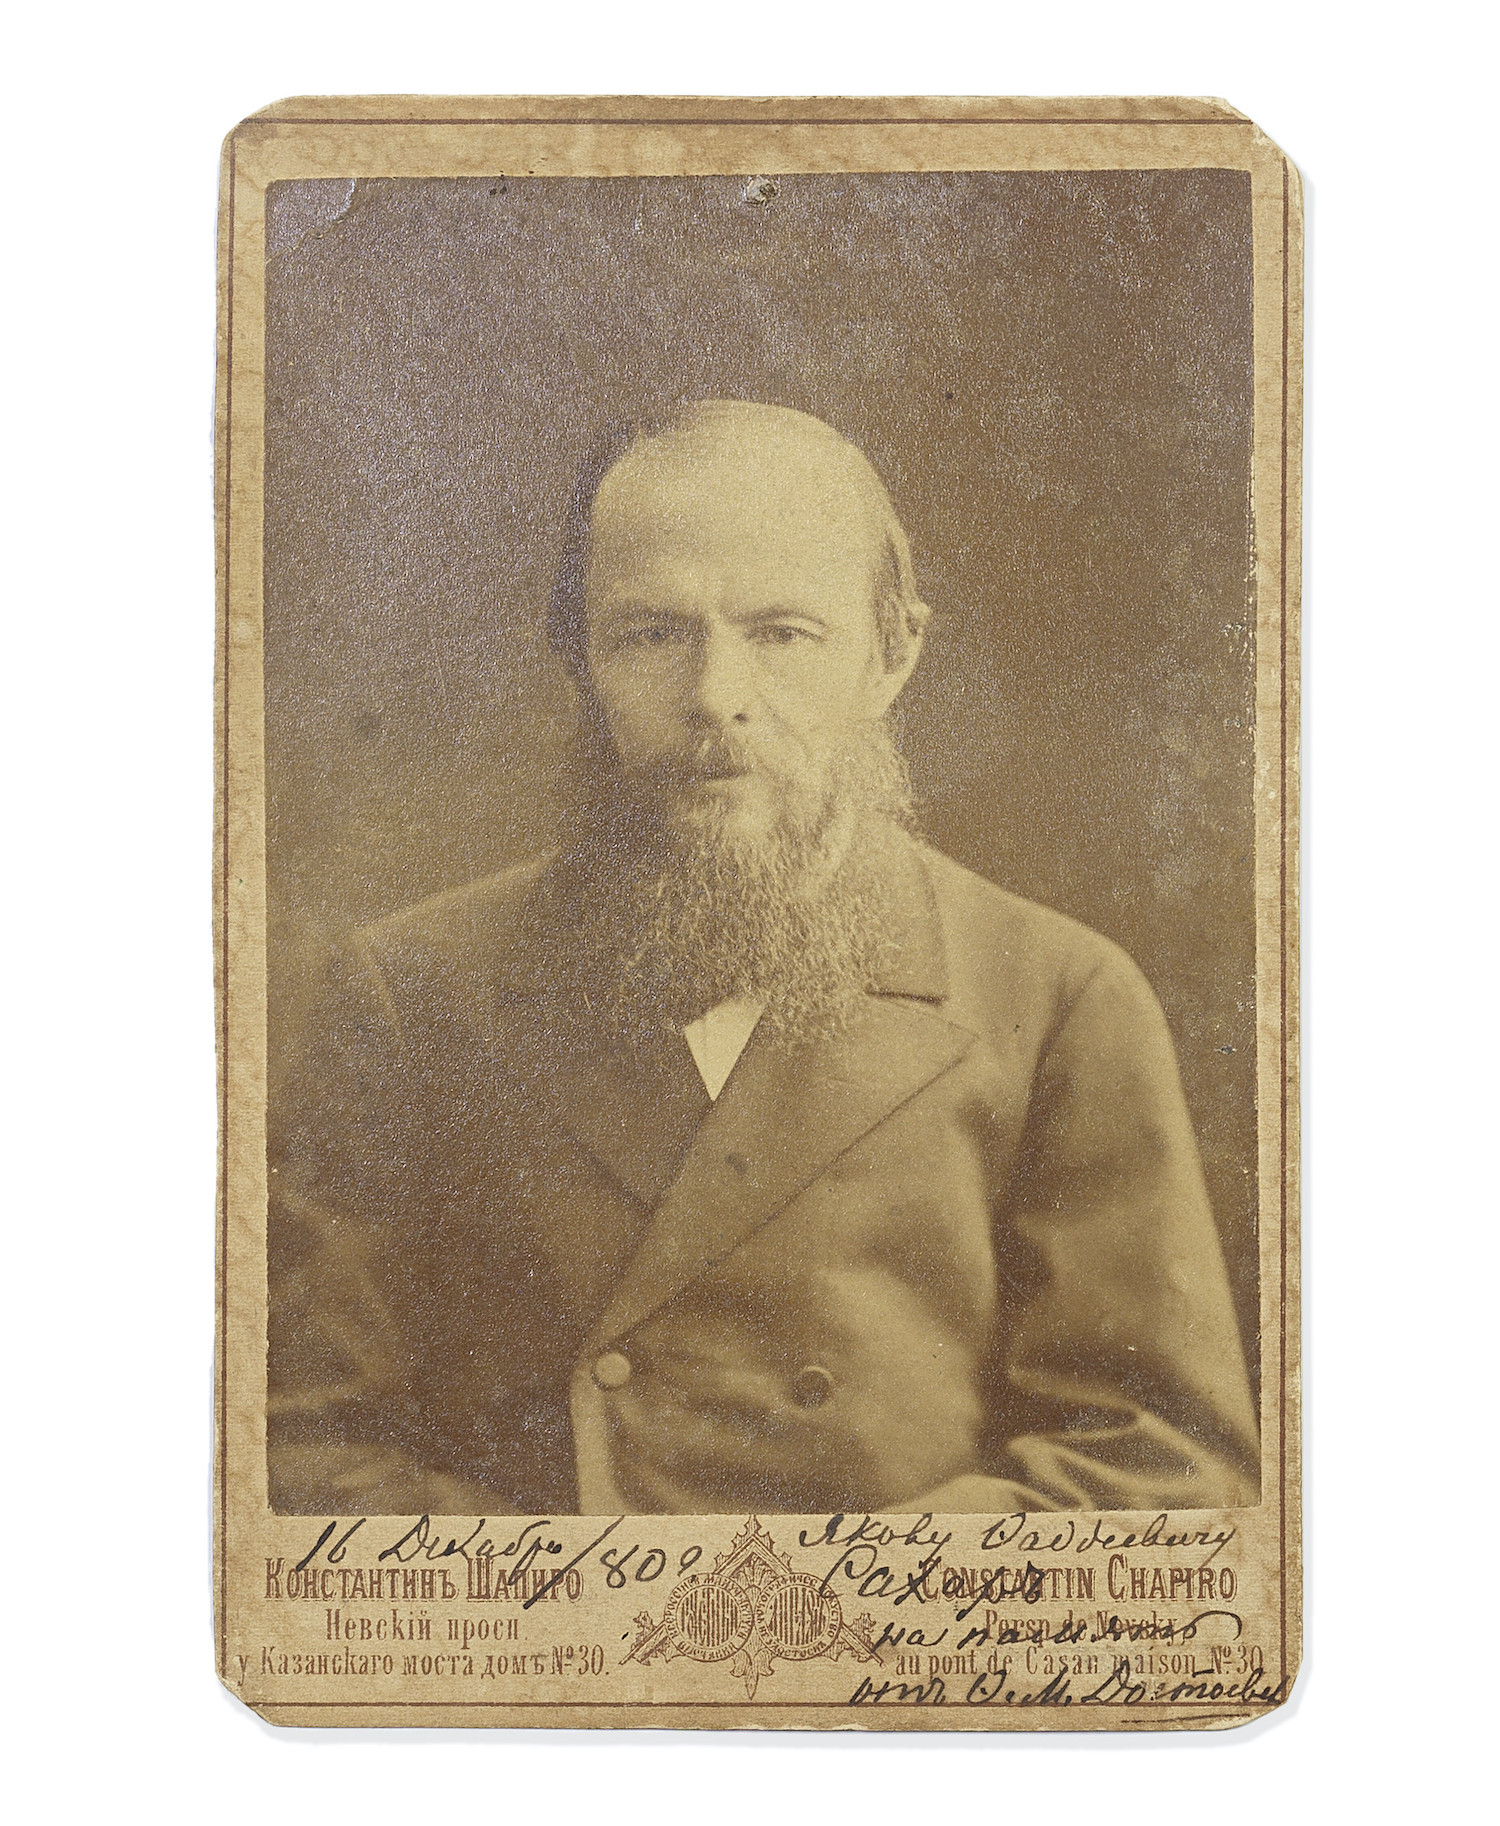 An old photograph of the Russian writer Fyodor Dostoevsky